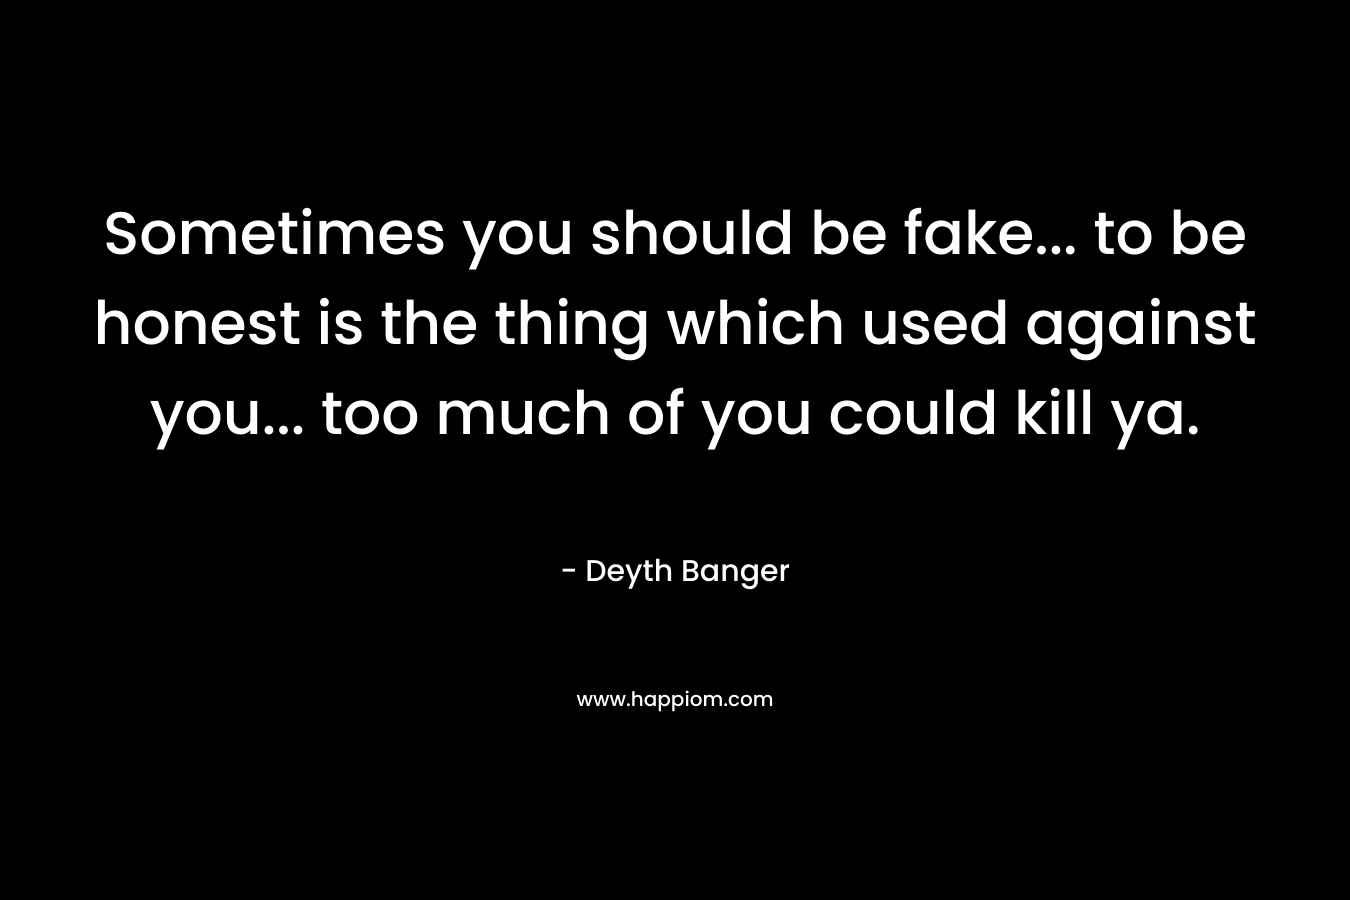 Sometimes you should be fake... to be honest is the thing which used against you... too much of you could kill ya.